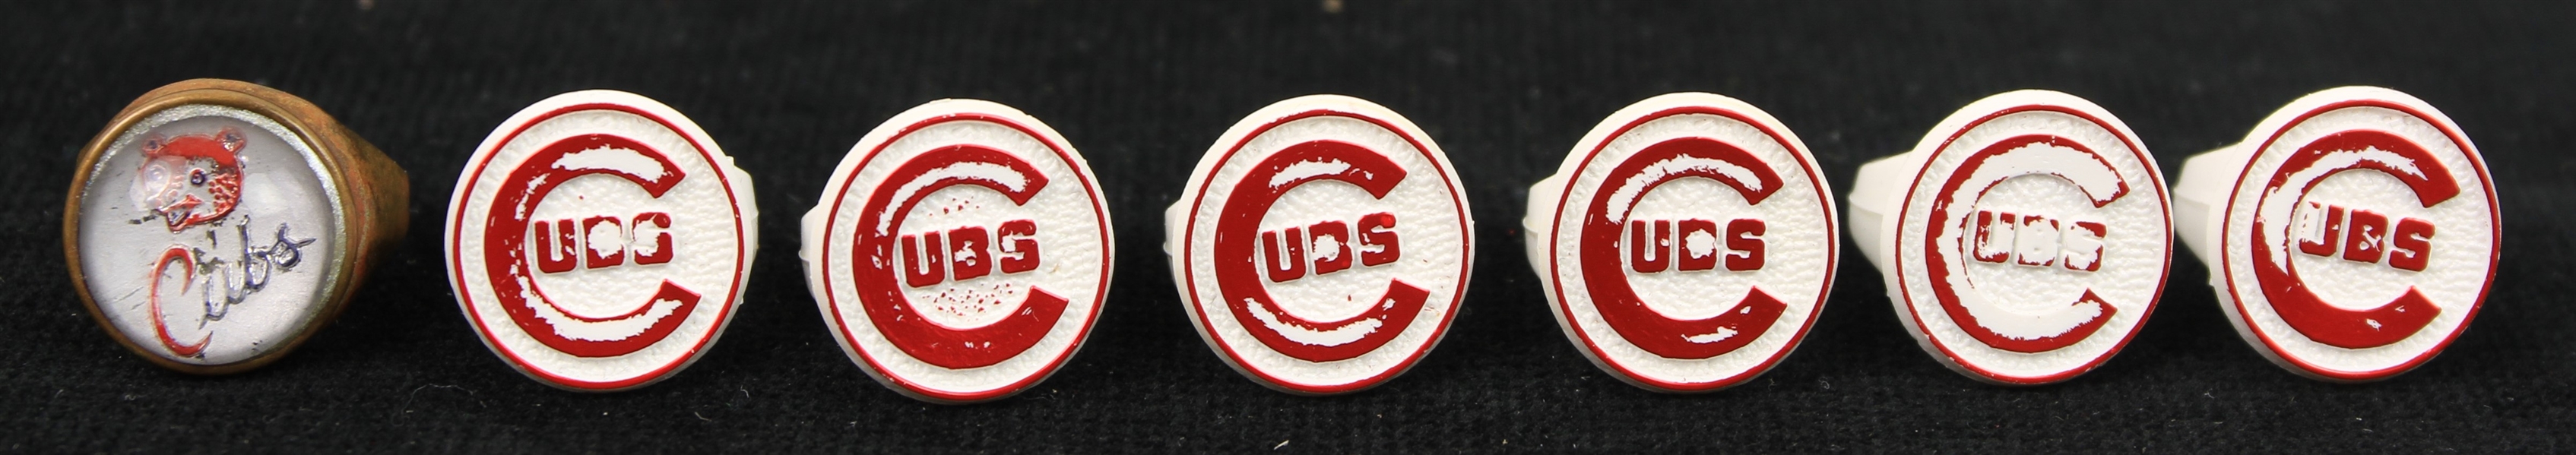 1960s-70s Chicago Cubs Souvenir Ring Collection - Lot of 7